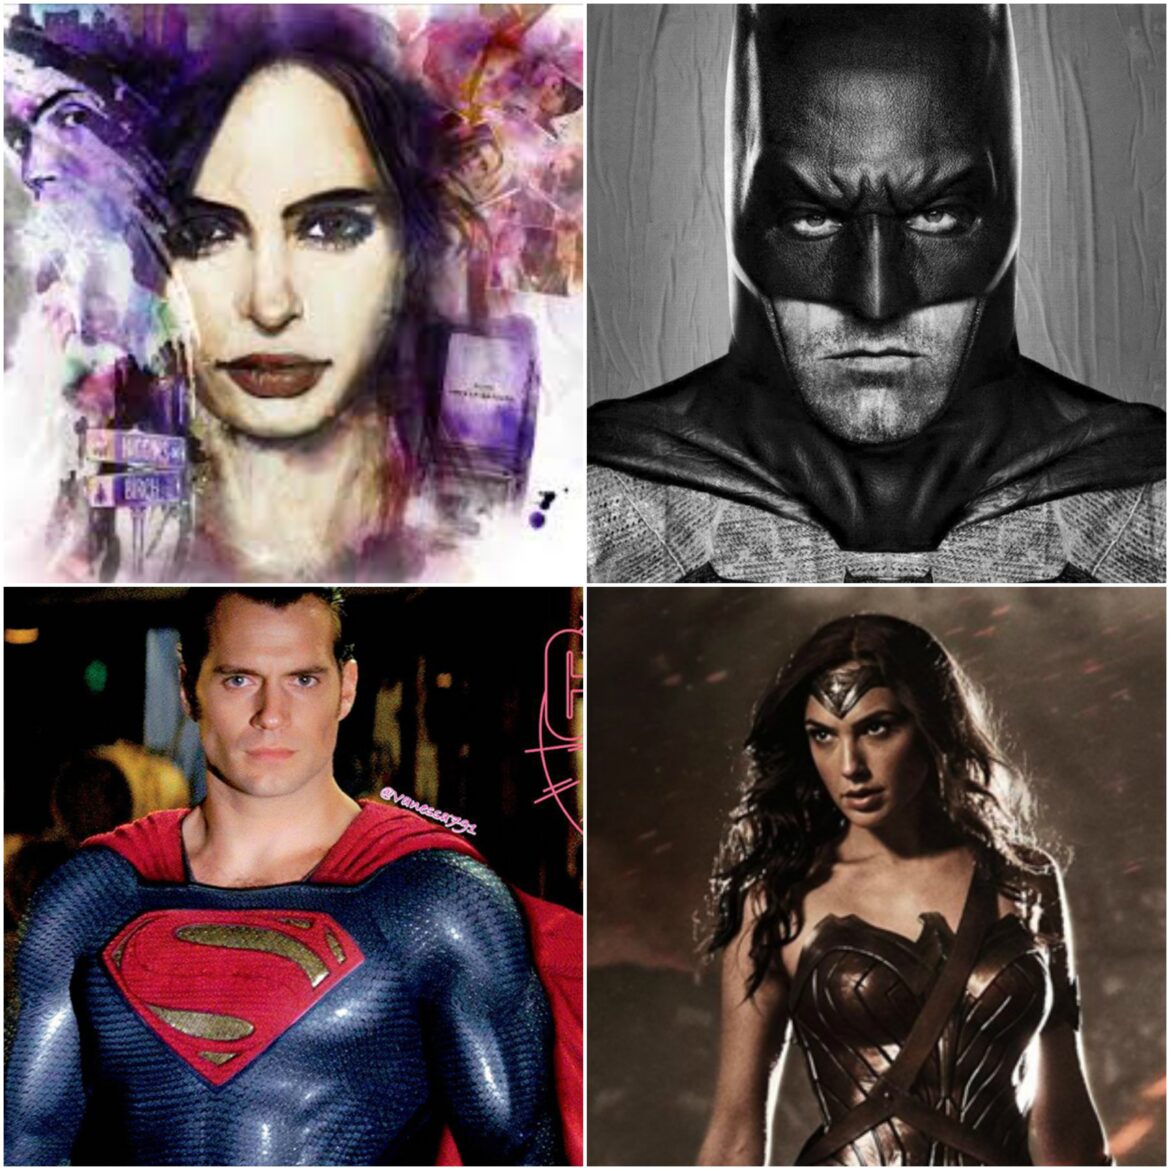 West Week Ever: Pop Culture In Review – 3/25/16 (“Do You Bleed?” Edition)